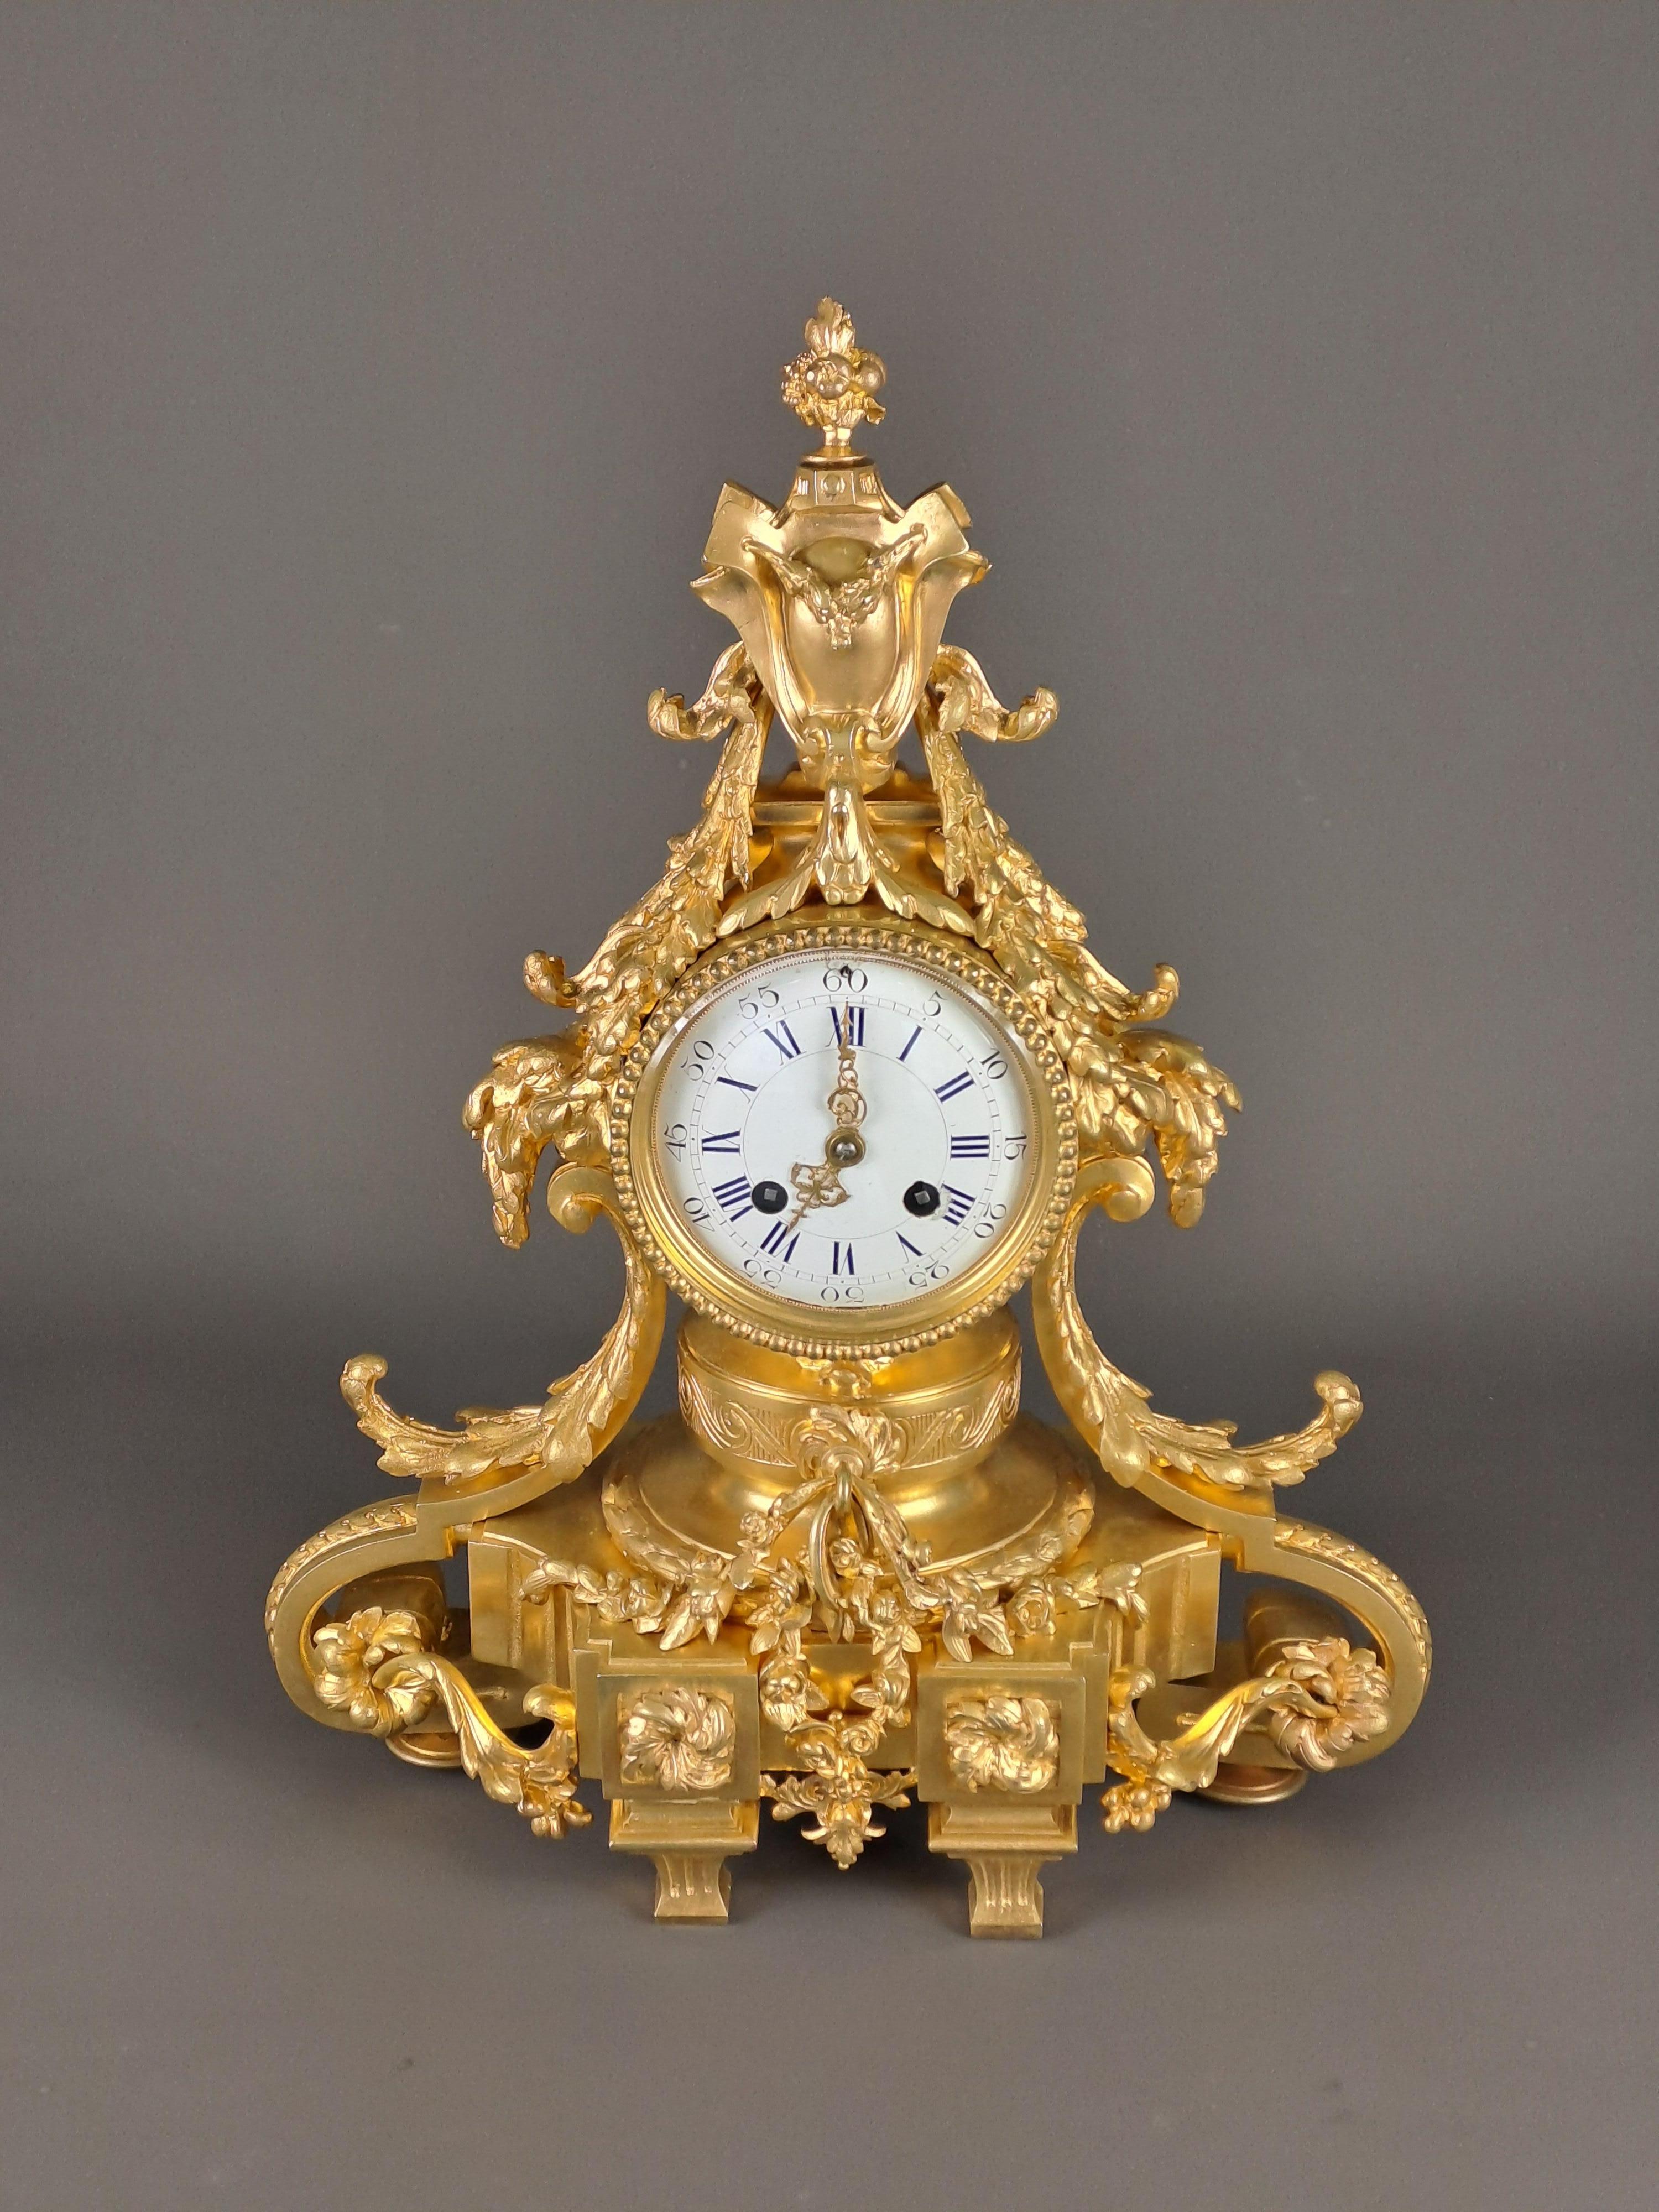 Magnificent Louis XVI clock in finely chiseled gilded bronze with rich decoration of plant garlands and foliage, pinnacle in the shape of a coat of arms.

Superb bronze work, bright gilding in very good condition.

CIRCA 1850

Parisian mecanism,